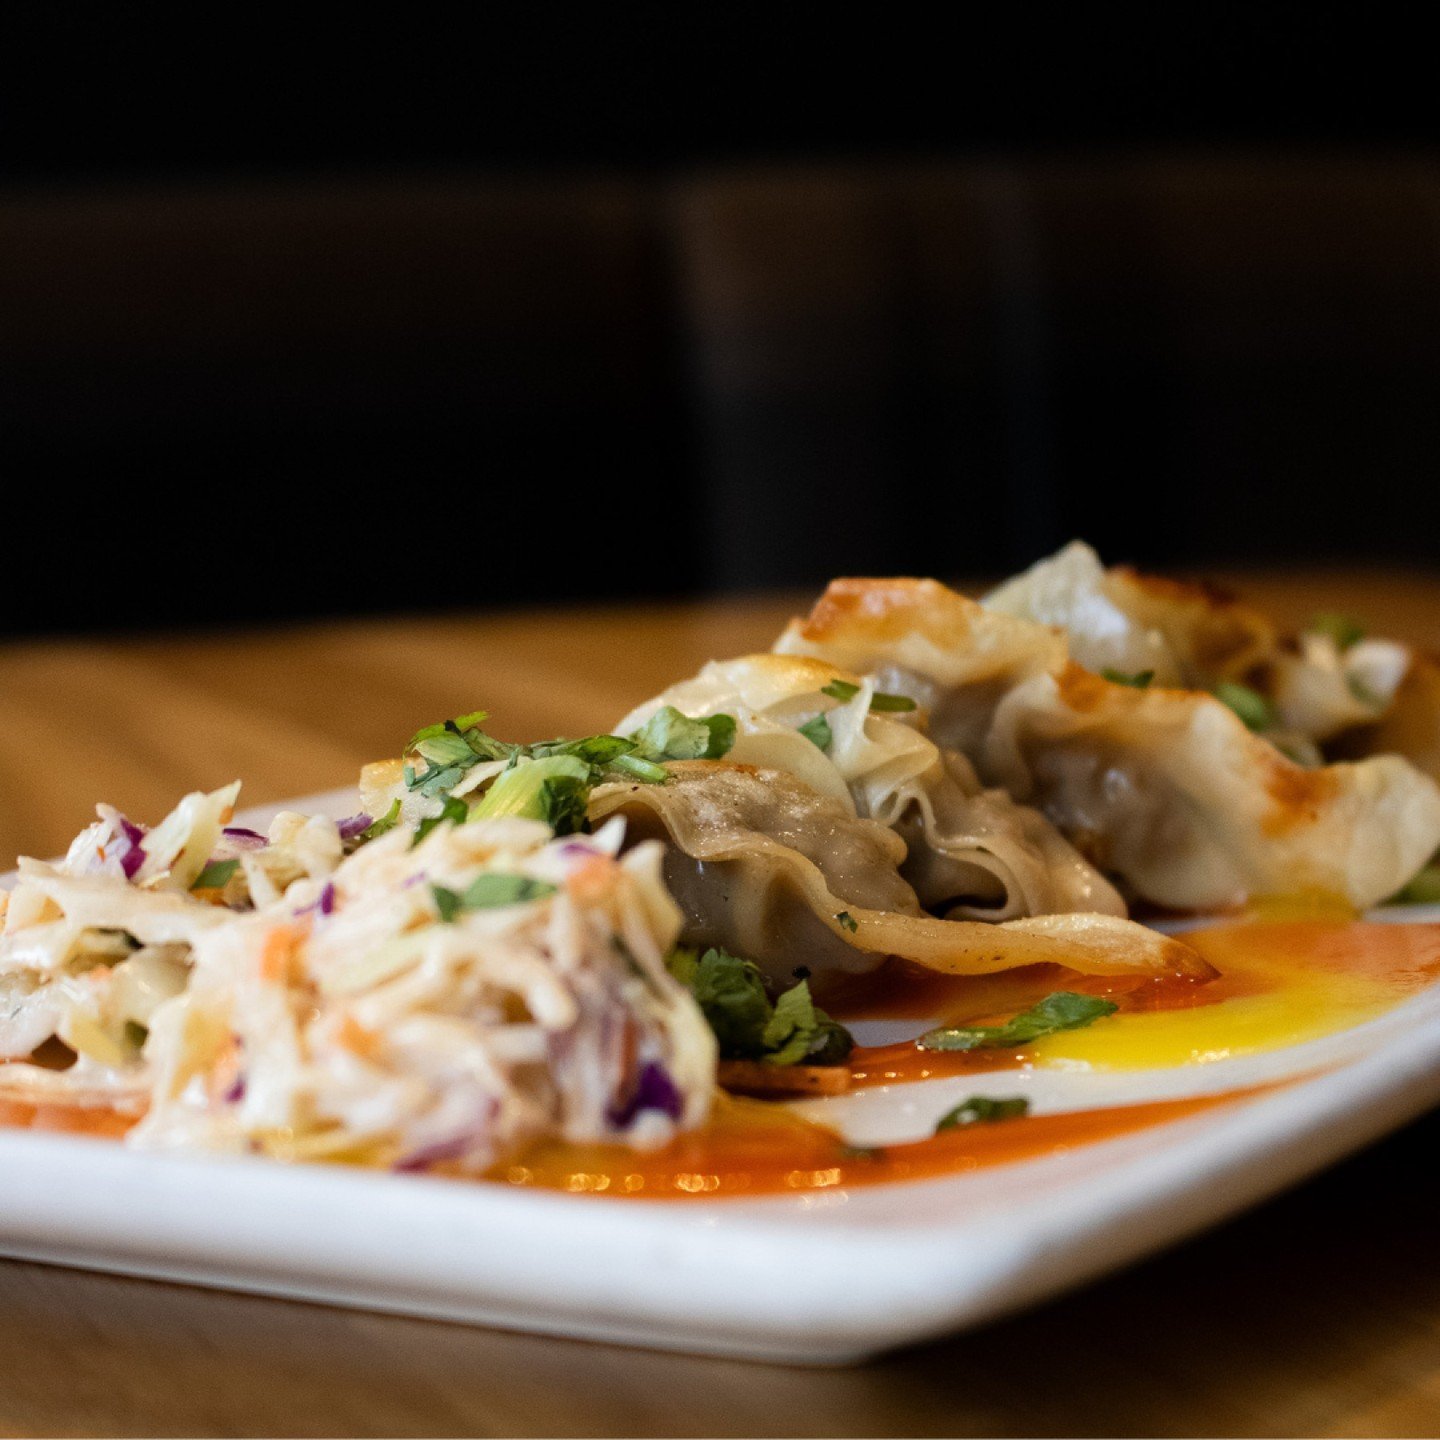 Show some love for the potstickers!

You know 'em, you love 'em. 😍

Our bison potstickers, with the mango &amp; garlic sauces and cucumber slaw, have been a popular starter for years. They'll satisfy in any season, any weather! 

Let's eat!

#montan